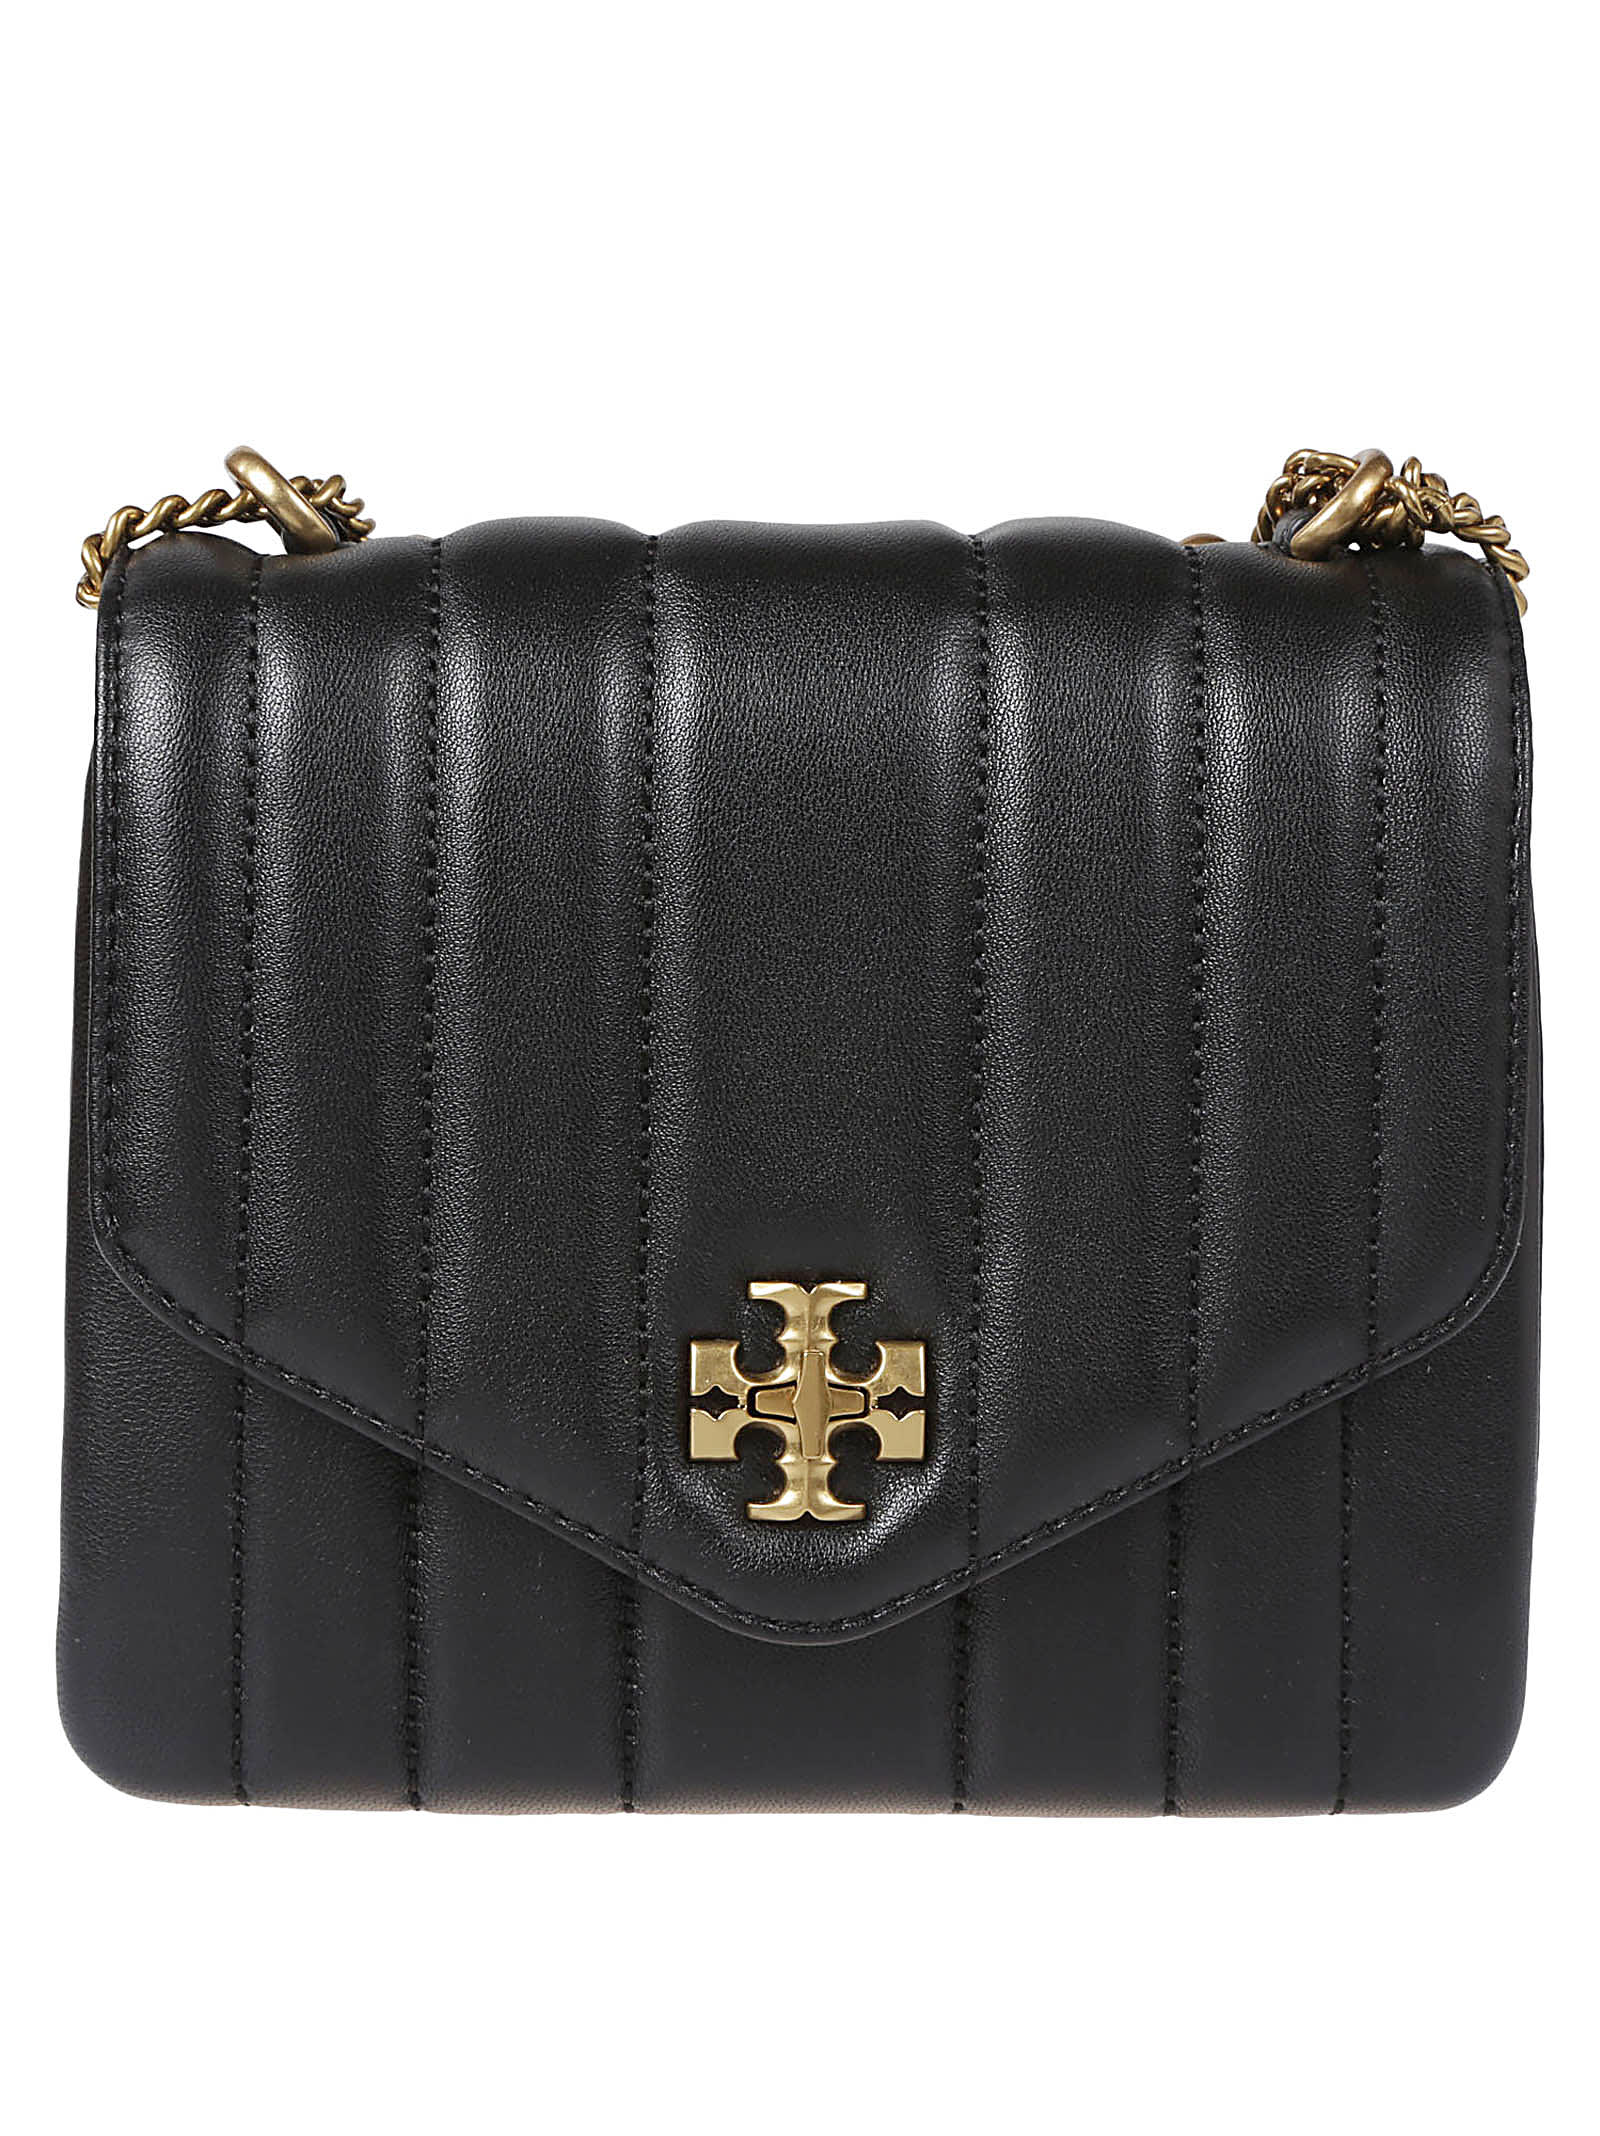 Tory Burch Kira Mini Quilted Leather Crossbody In Black | ModeSens